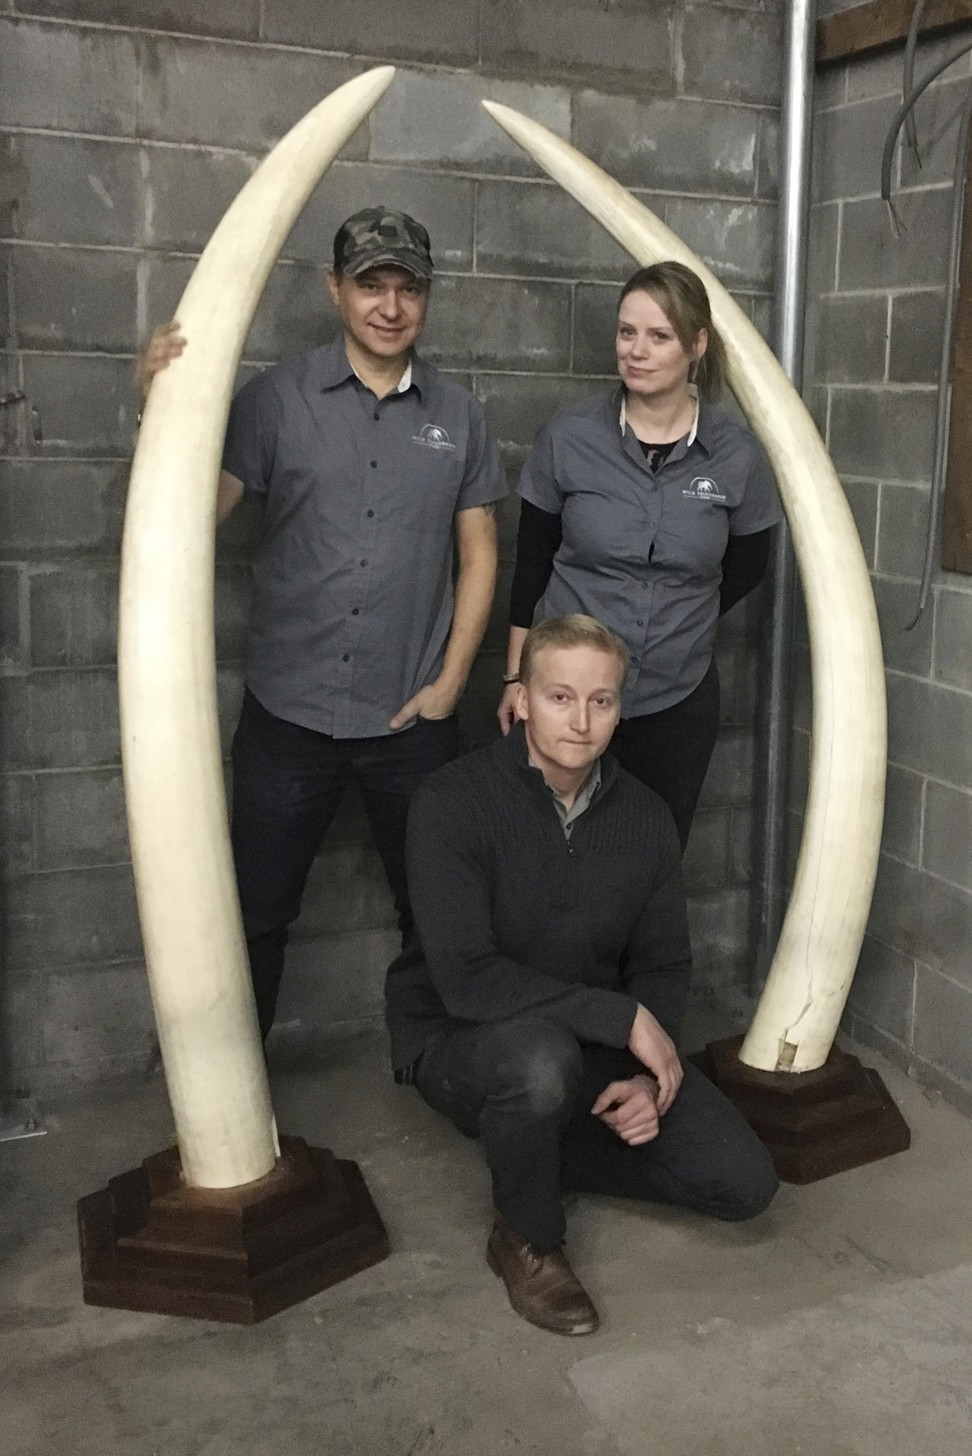 John Steward (left) and Wendy Hapgood (right), directors of the Wild Tomorrow Fund, pose with Lt. Jesse Paluch of the New York State Department of Environmental Conservation and a pair of elephant tusks at a New York State Department of Environmental Conservation warehouse in Albany, New York. Photo: AP